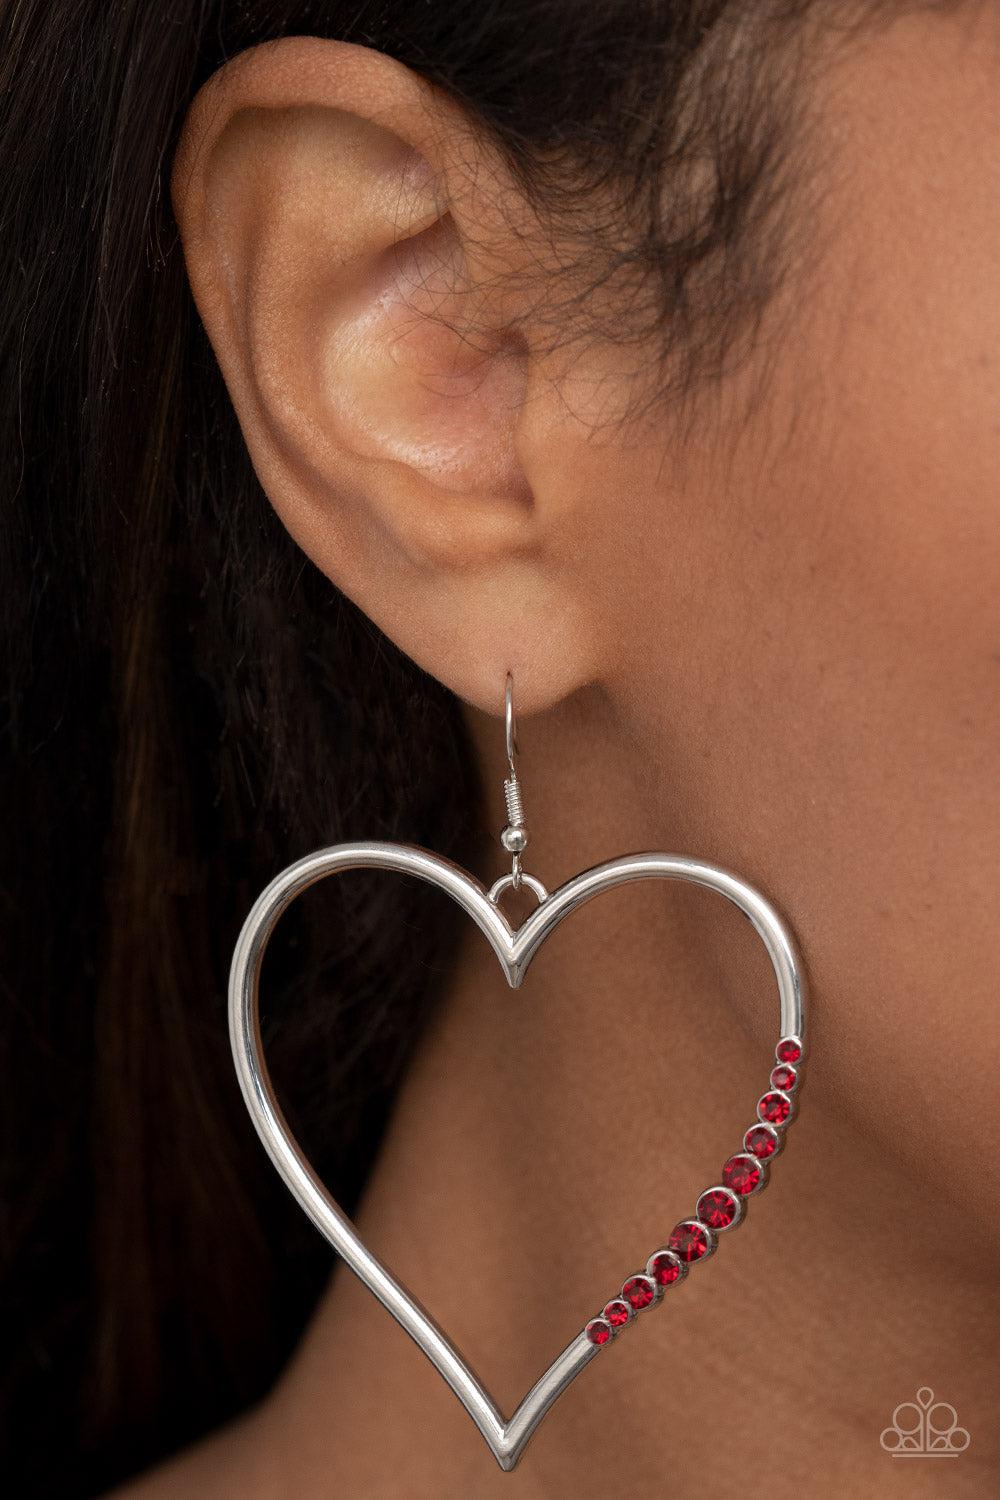 Bewitched Kiss Red Rhinestone Heart Earrings - Paparazzi Accessories- on model - CarasShop.com - $5 Jewelry by Cara Jewels